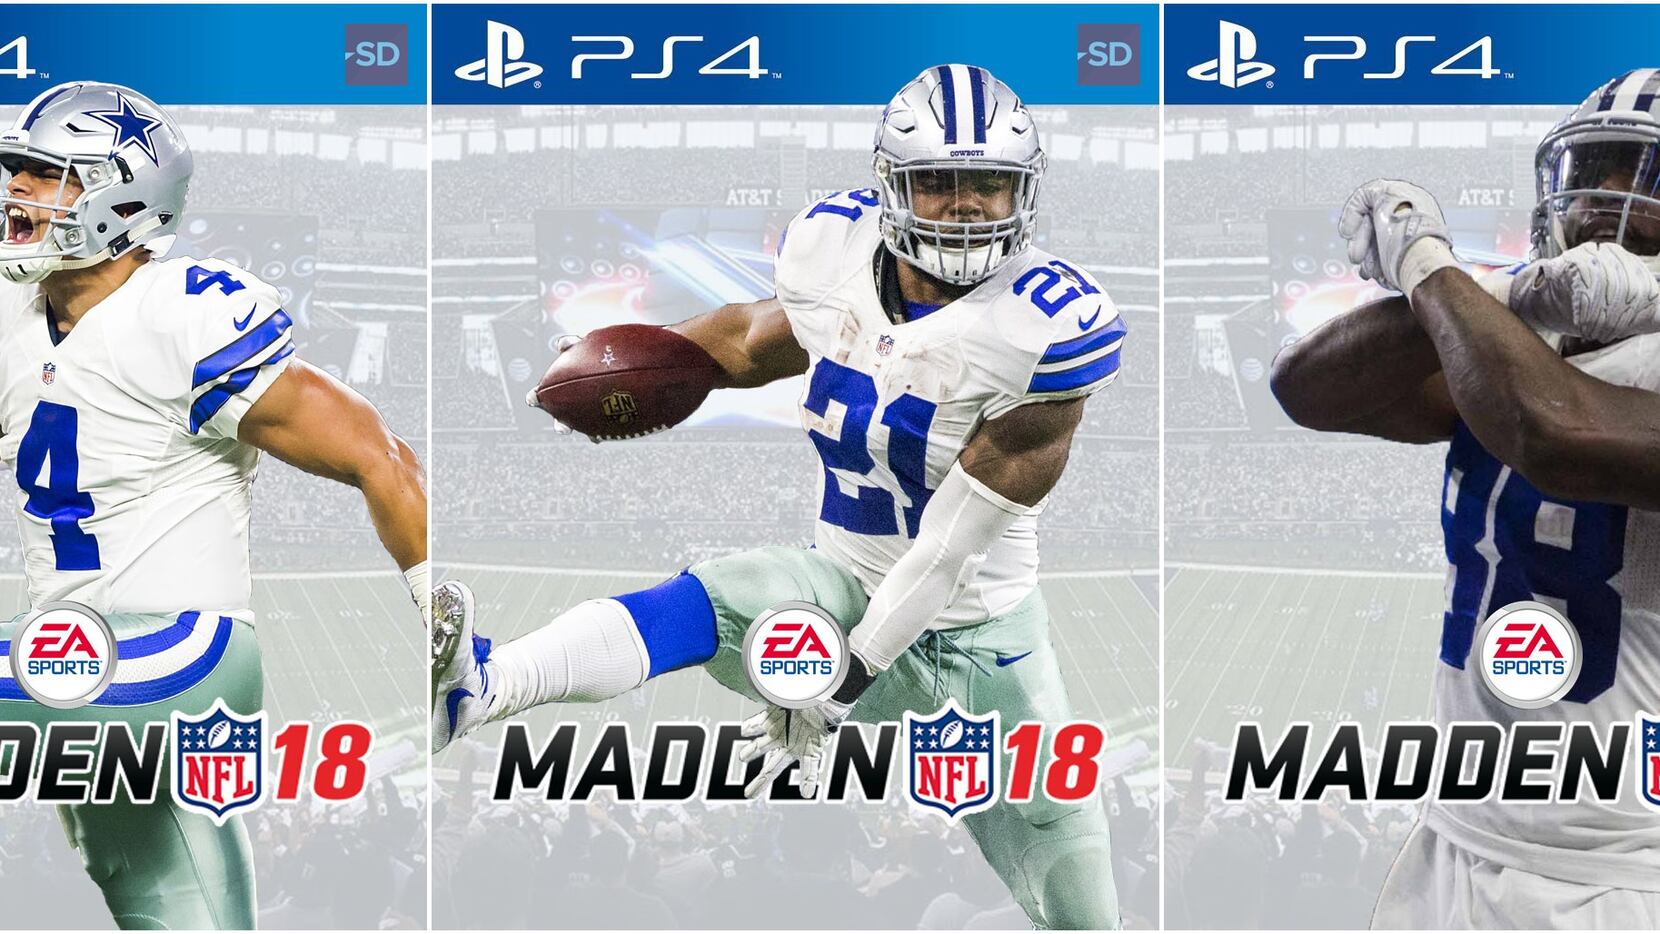 Tom Brady may be the Madden cover athlete, but here are some  Cowboys-inspired covers we'd like to see